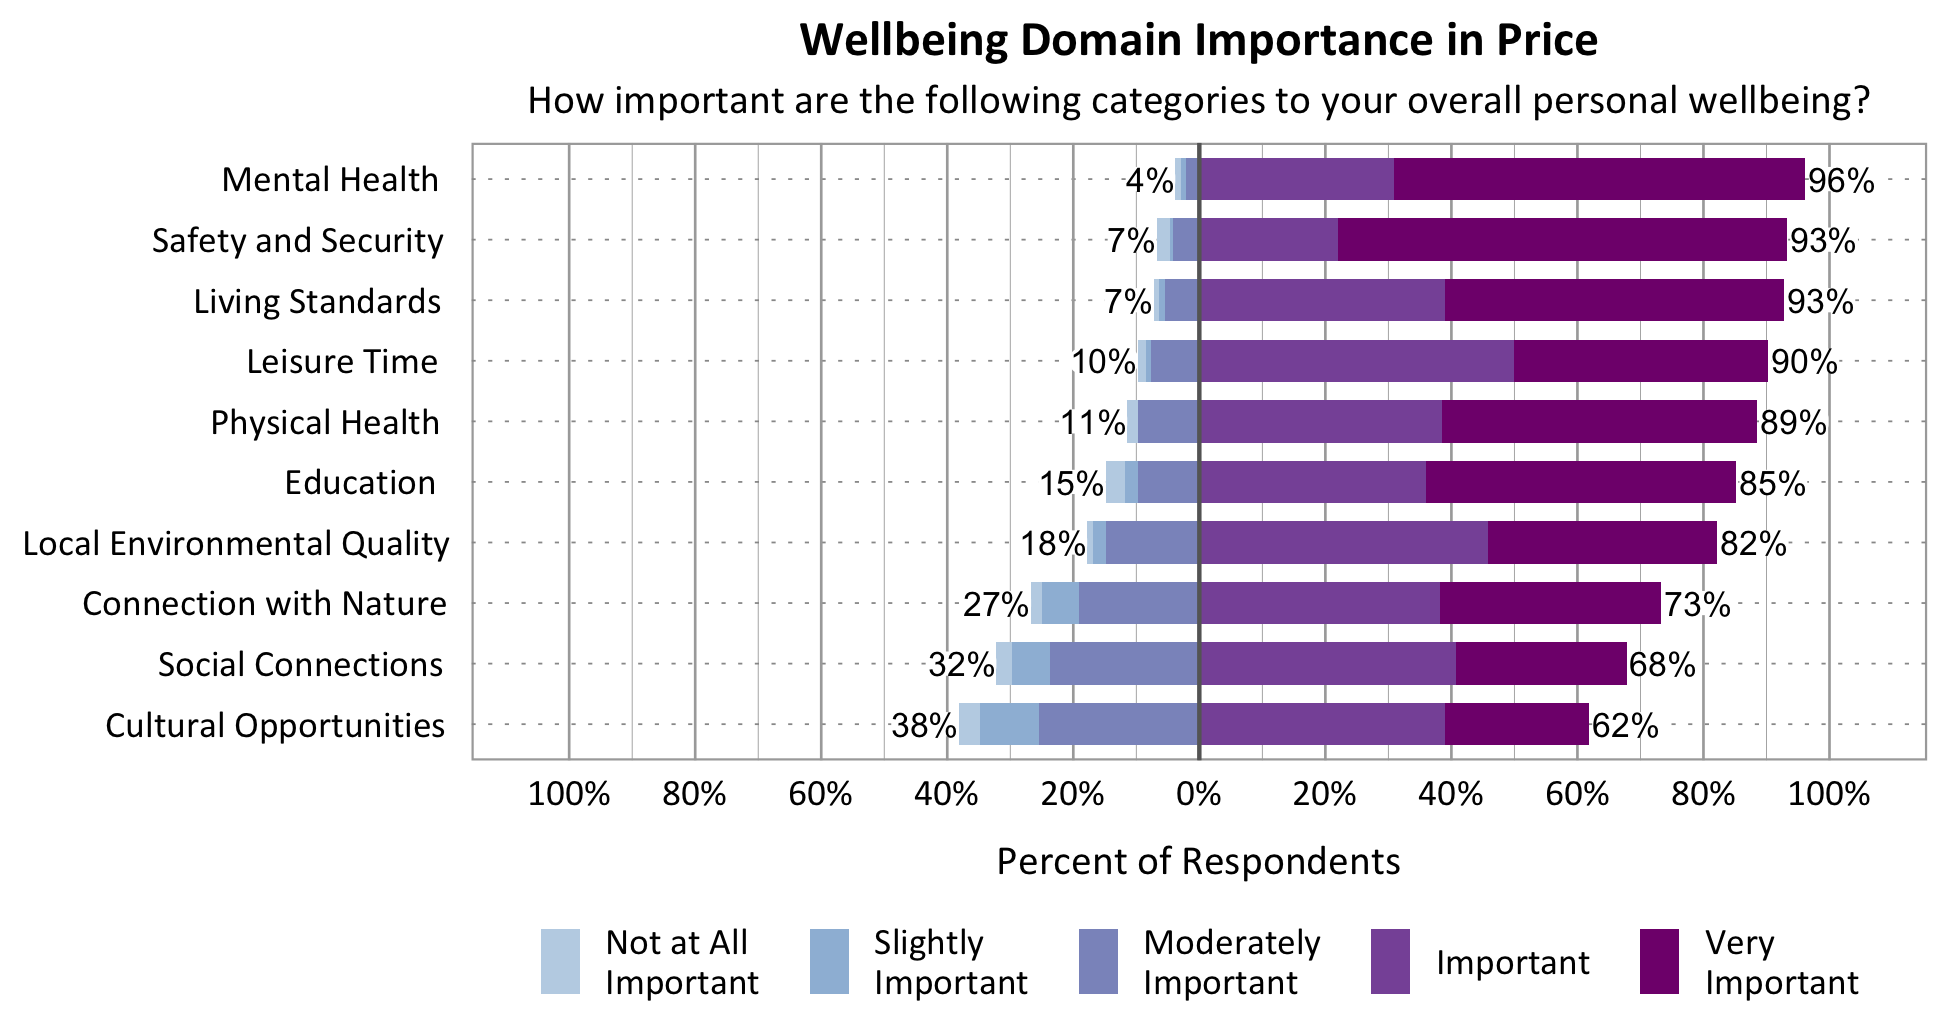 Likert Graph. Title: Wellbeing Domain Importance in Price. Subtitle: How important are the following categories to your overall personal wellbeing? Category: Safety and Security - 7% of respondents rated as not at all important, slightly important, or moderately important while 93% rated as important or very important; Category: Mental Health - 4% of respondents rated as not at all important, slightly important, or moderately important while 96% rated as important or very important; Category: Physical Health - 11% of respondents rated as not at all important, slightly important, or moderately important while 89% rated as important or very important; Category: Living Standards - 7% of respondents rated as not at all important, slightly important, or moderately important while 93% rated as important or very important; Category: Connection with Nature - 27% of respondents rated as not at all important, slightly important, or moderately important while 73% of respondents rated as important or very important; Category: Leisure Time - 10% of respondents rated as not at all important, slightly important, or moderately important while 90% rated as important or very important; Category: Local Environmental Quality - 18% of respondents rated as not at all important, slightly important, or moderately important while 82% rated as important or very important; Category: Social Connections - 32% rated as not at all important, slightly important, or moderately important while 68% rated as important or very important; Category: Education - 15% of respondents rated as not at all important, slightly important, or moderately important while 85% rated as important or very important; Category: Cultural Opportunities - 38% rated as not at all important, slightly important, or moderately important while 62% rated as important or very important.